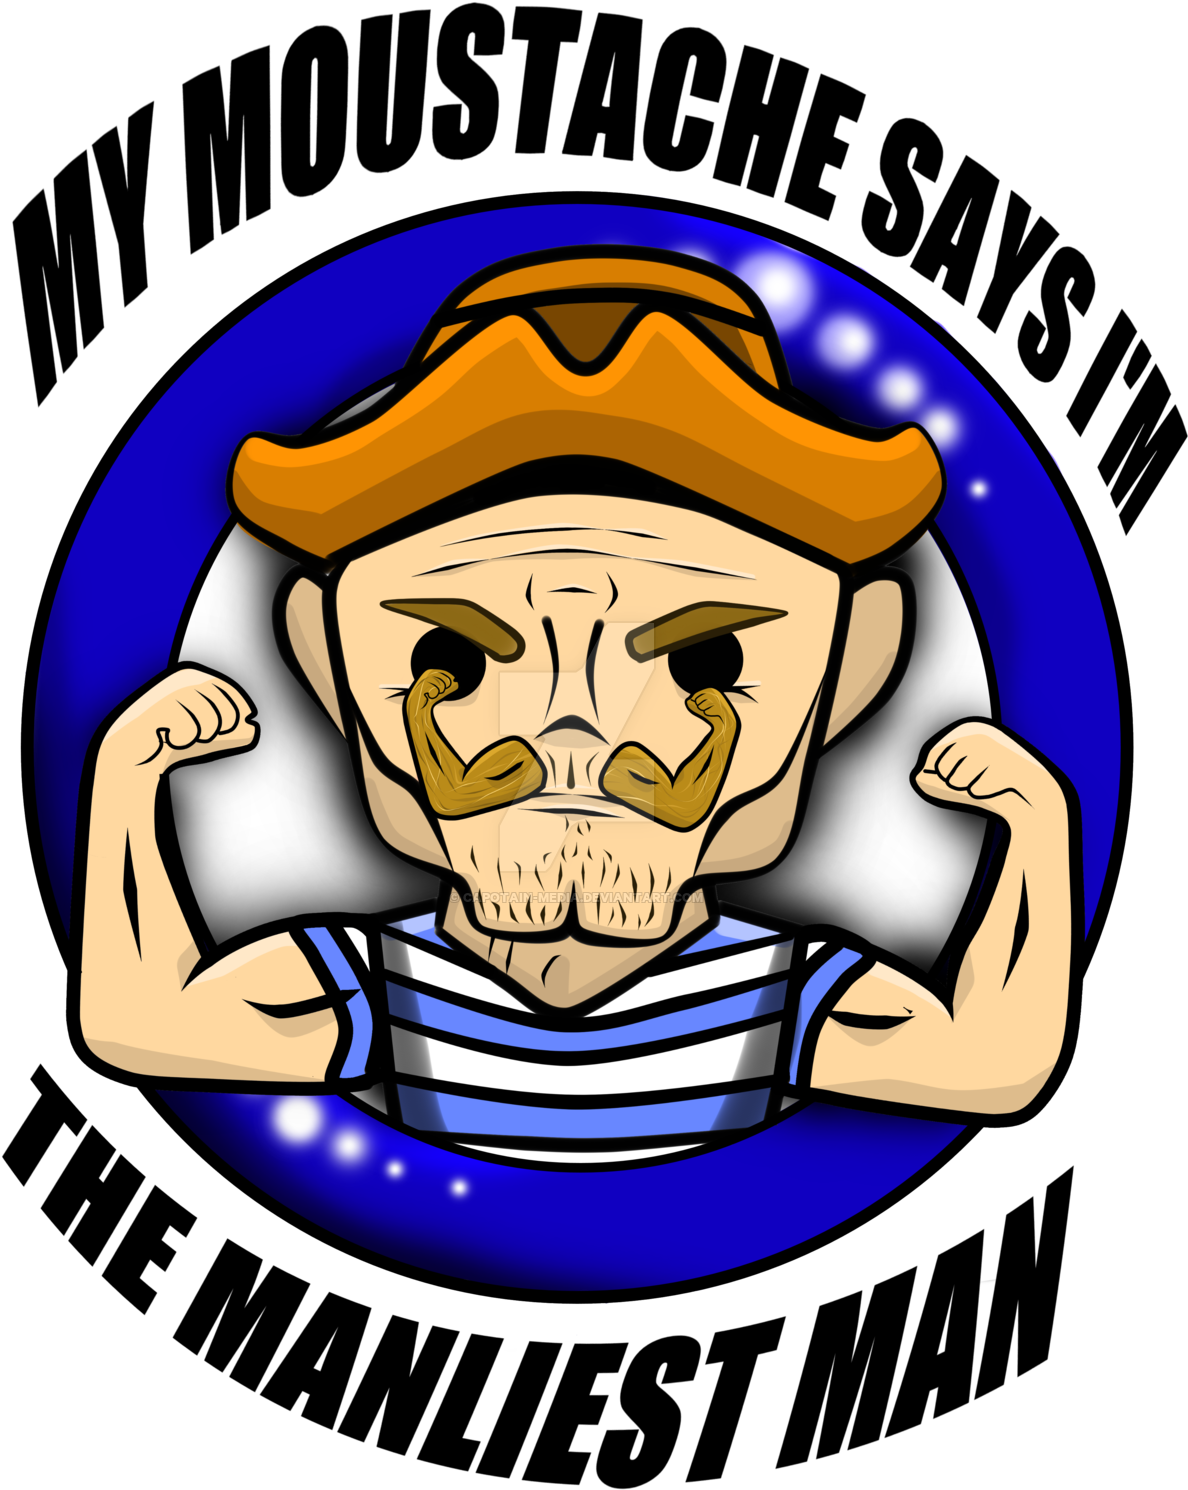 Manly Moustache Man By Capotain-media - Manly Moustache Man By Capotain-media (1280x1600)